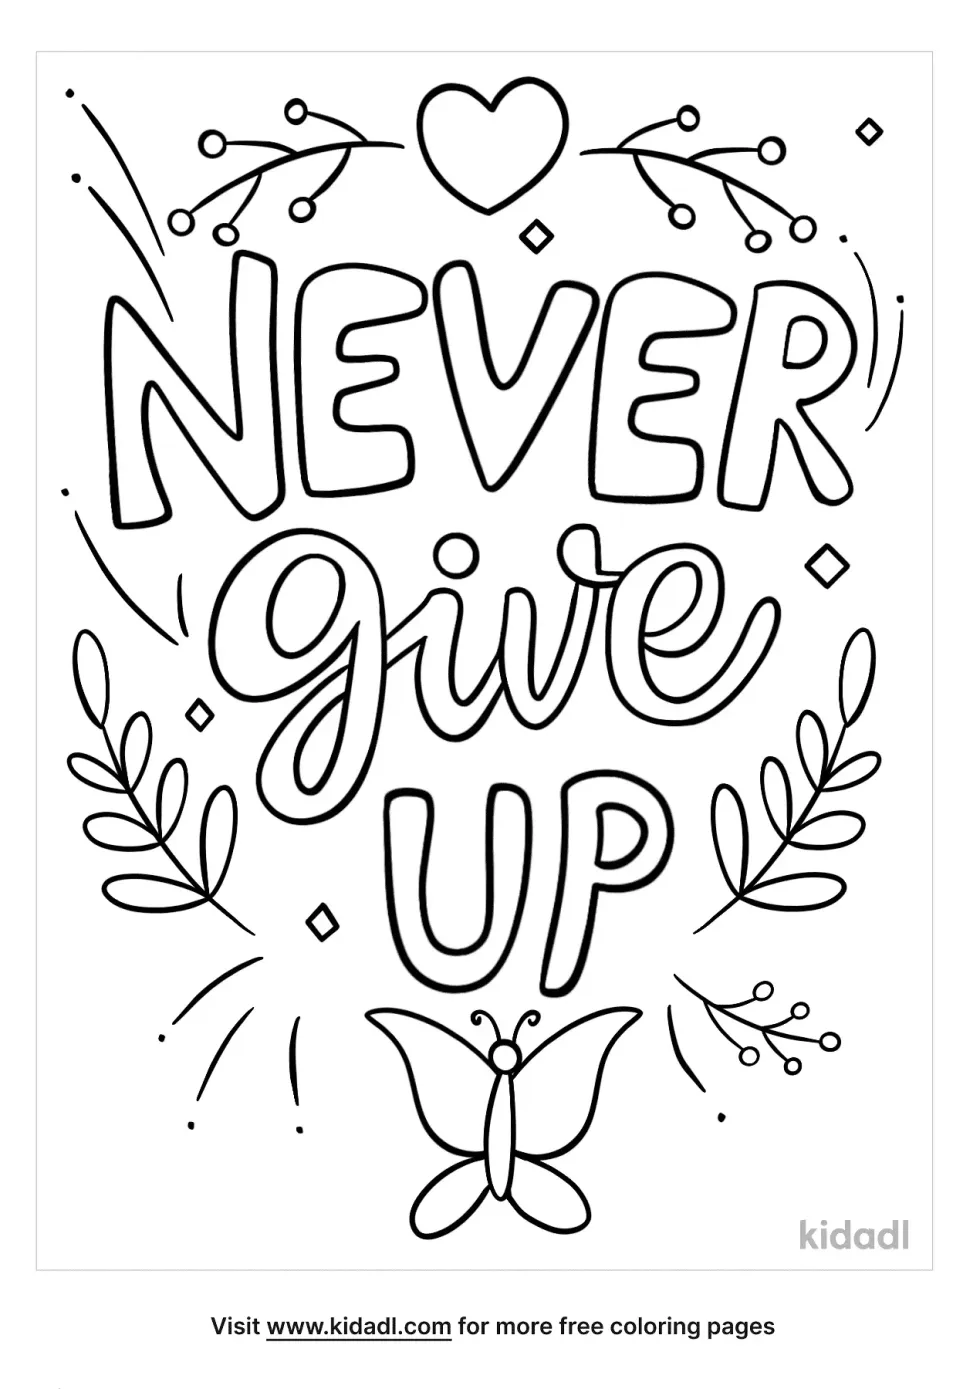 Never Give Up Coloring Page